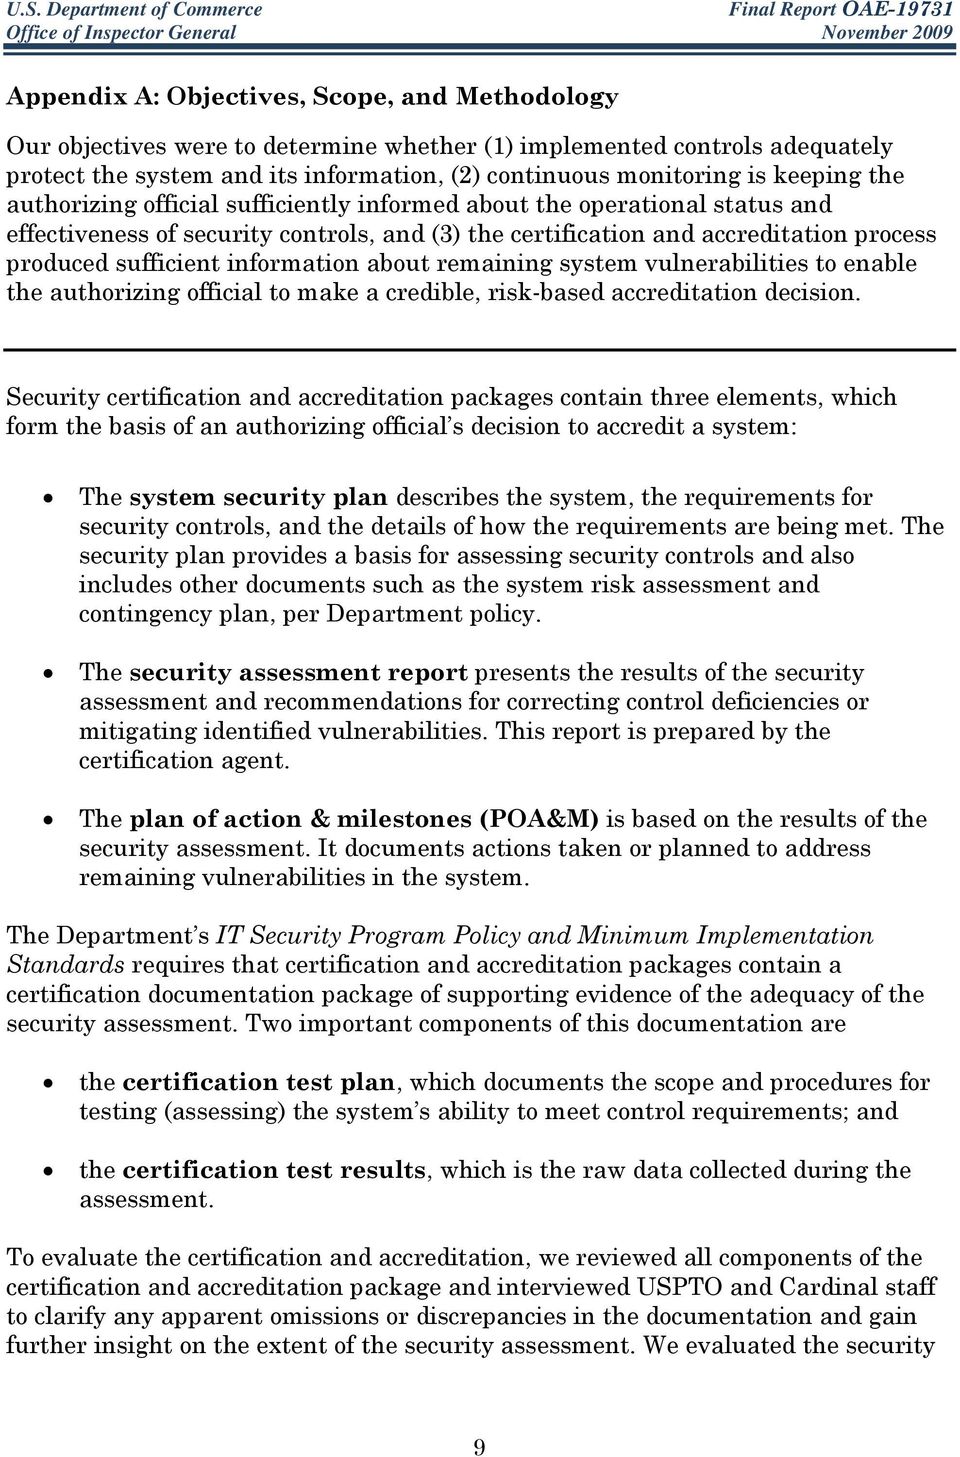 information about remaining system vulnerabilities to enable the authorizing official to make a credible, risk-based accreditation decision.